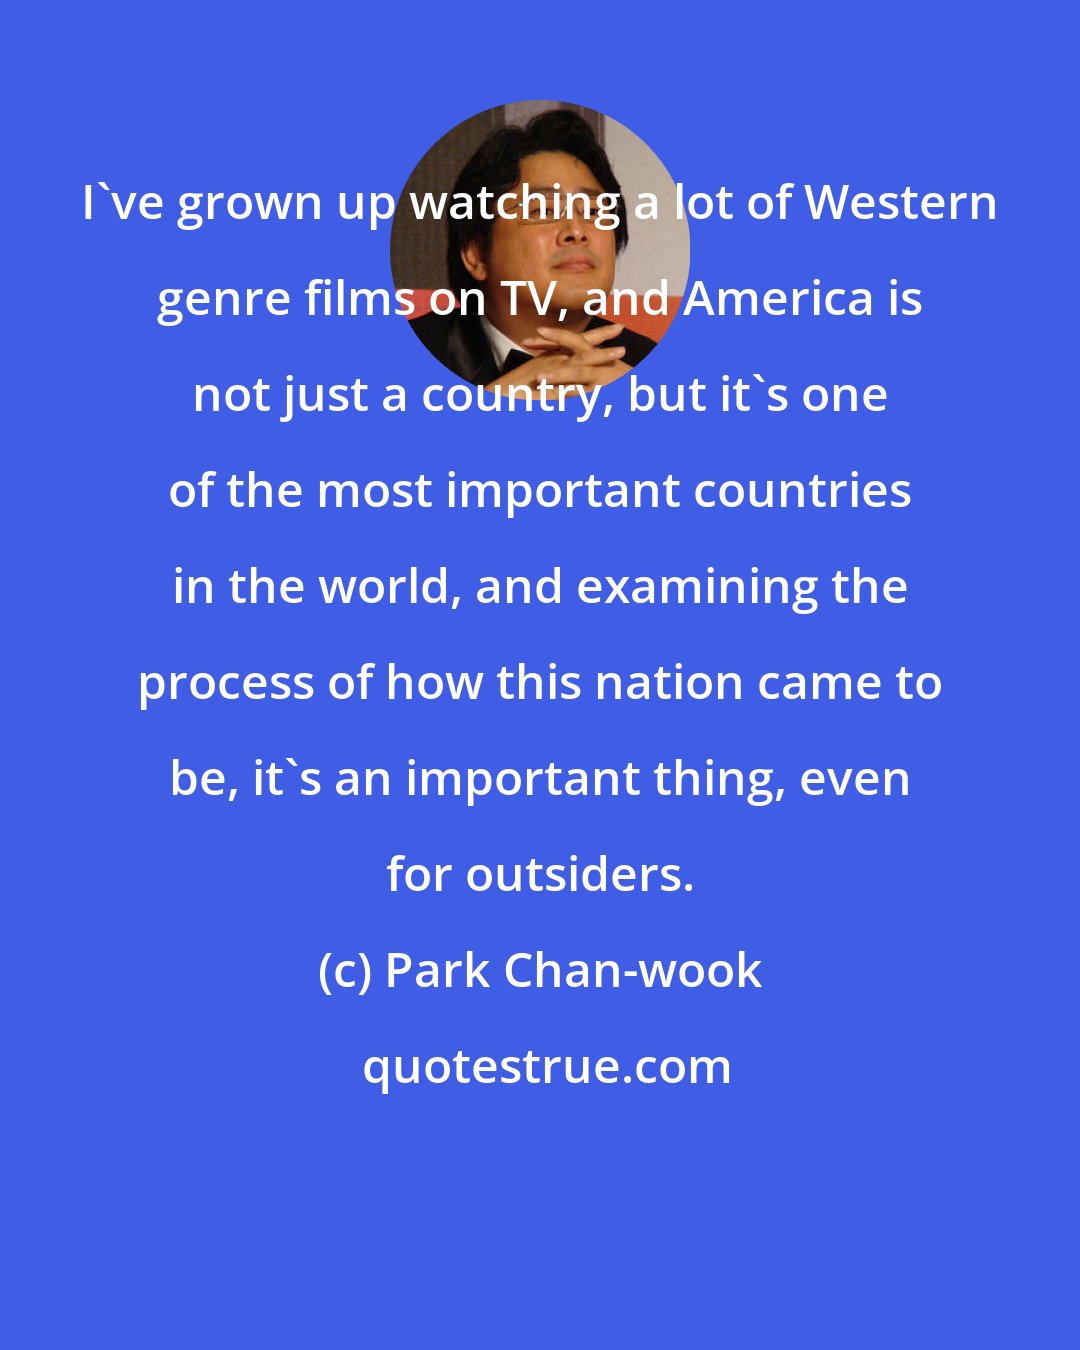 Park Chan-wook: I've grown up watching a lot of Western genre films on TV, and America is not just a country, but it's one of the most important countries in the world, and examining the process of how this nation came to be, it's an important thing, even for outsiders.